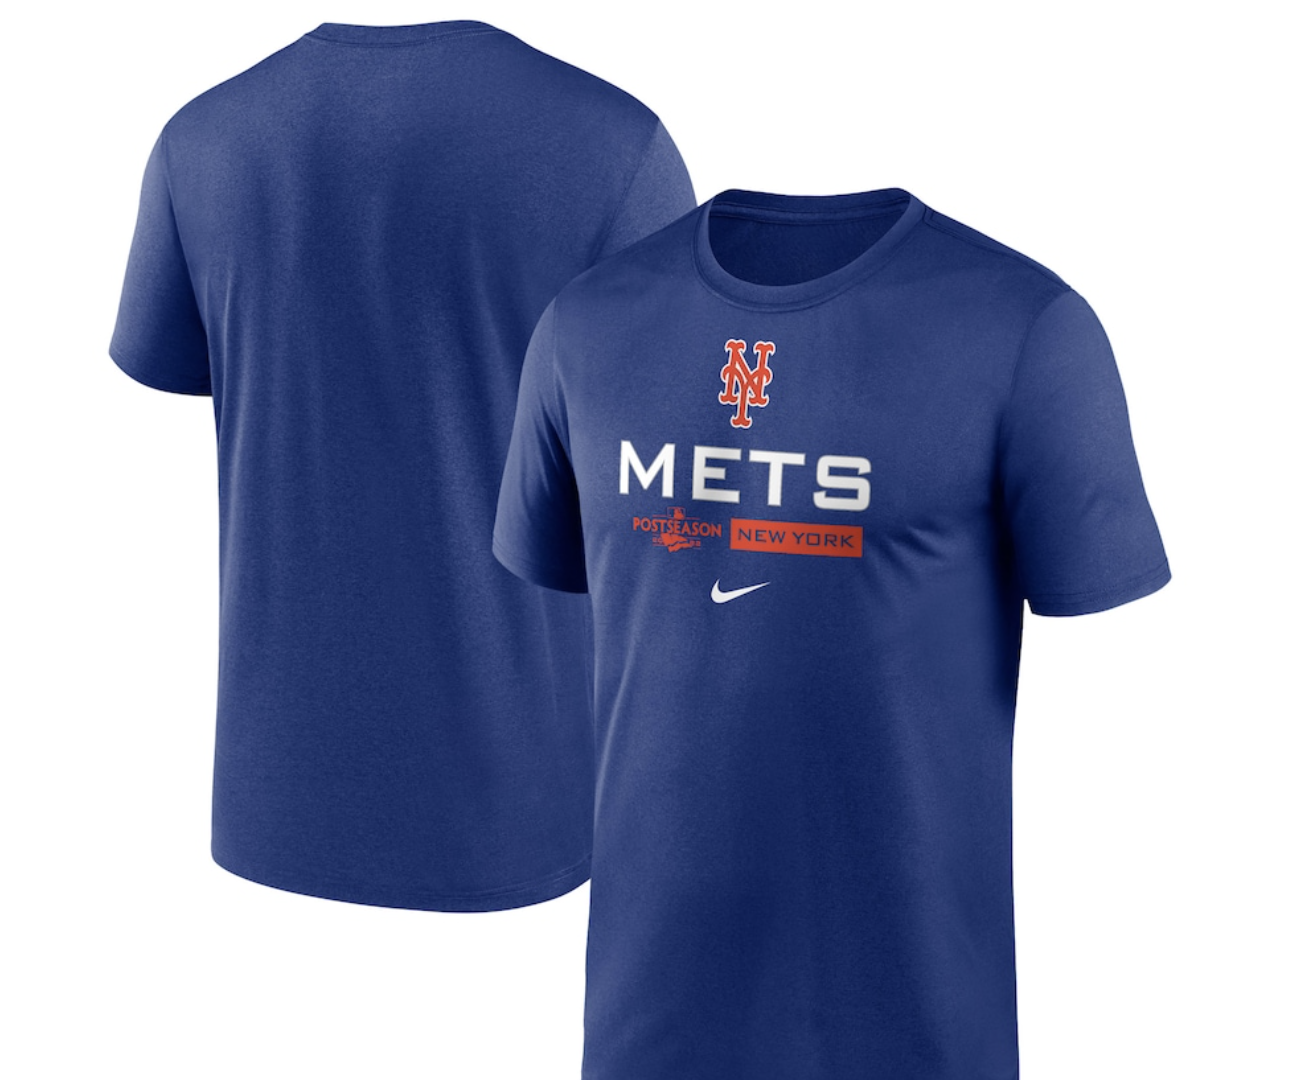 New York Mets combined no hitter April 29 2022 signatures shirt, hoodie,  sweater and v-neck t-shirt